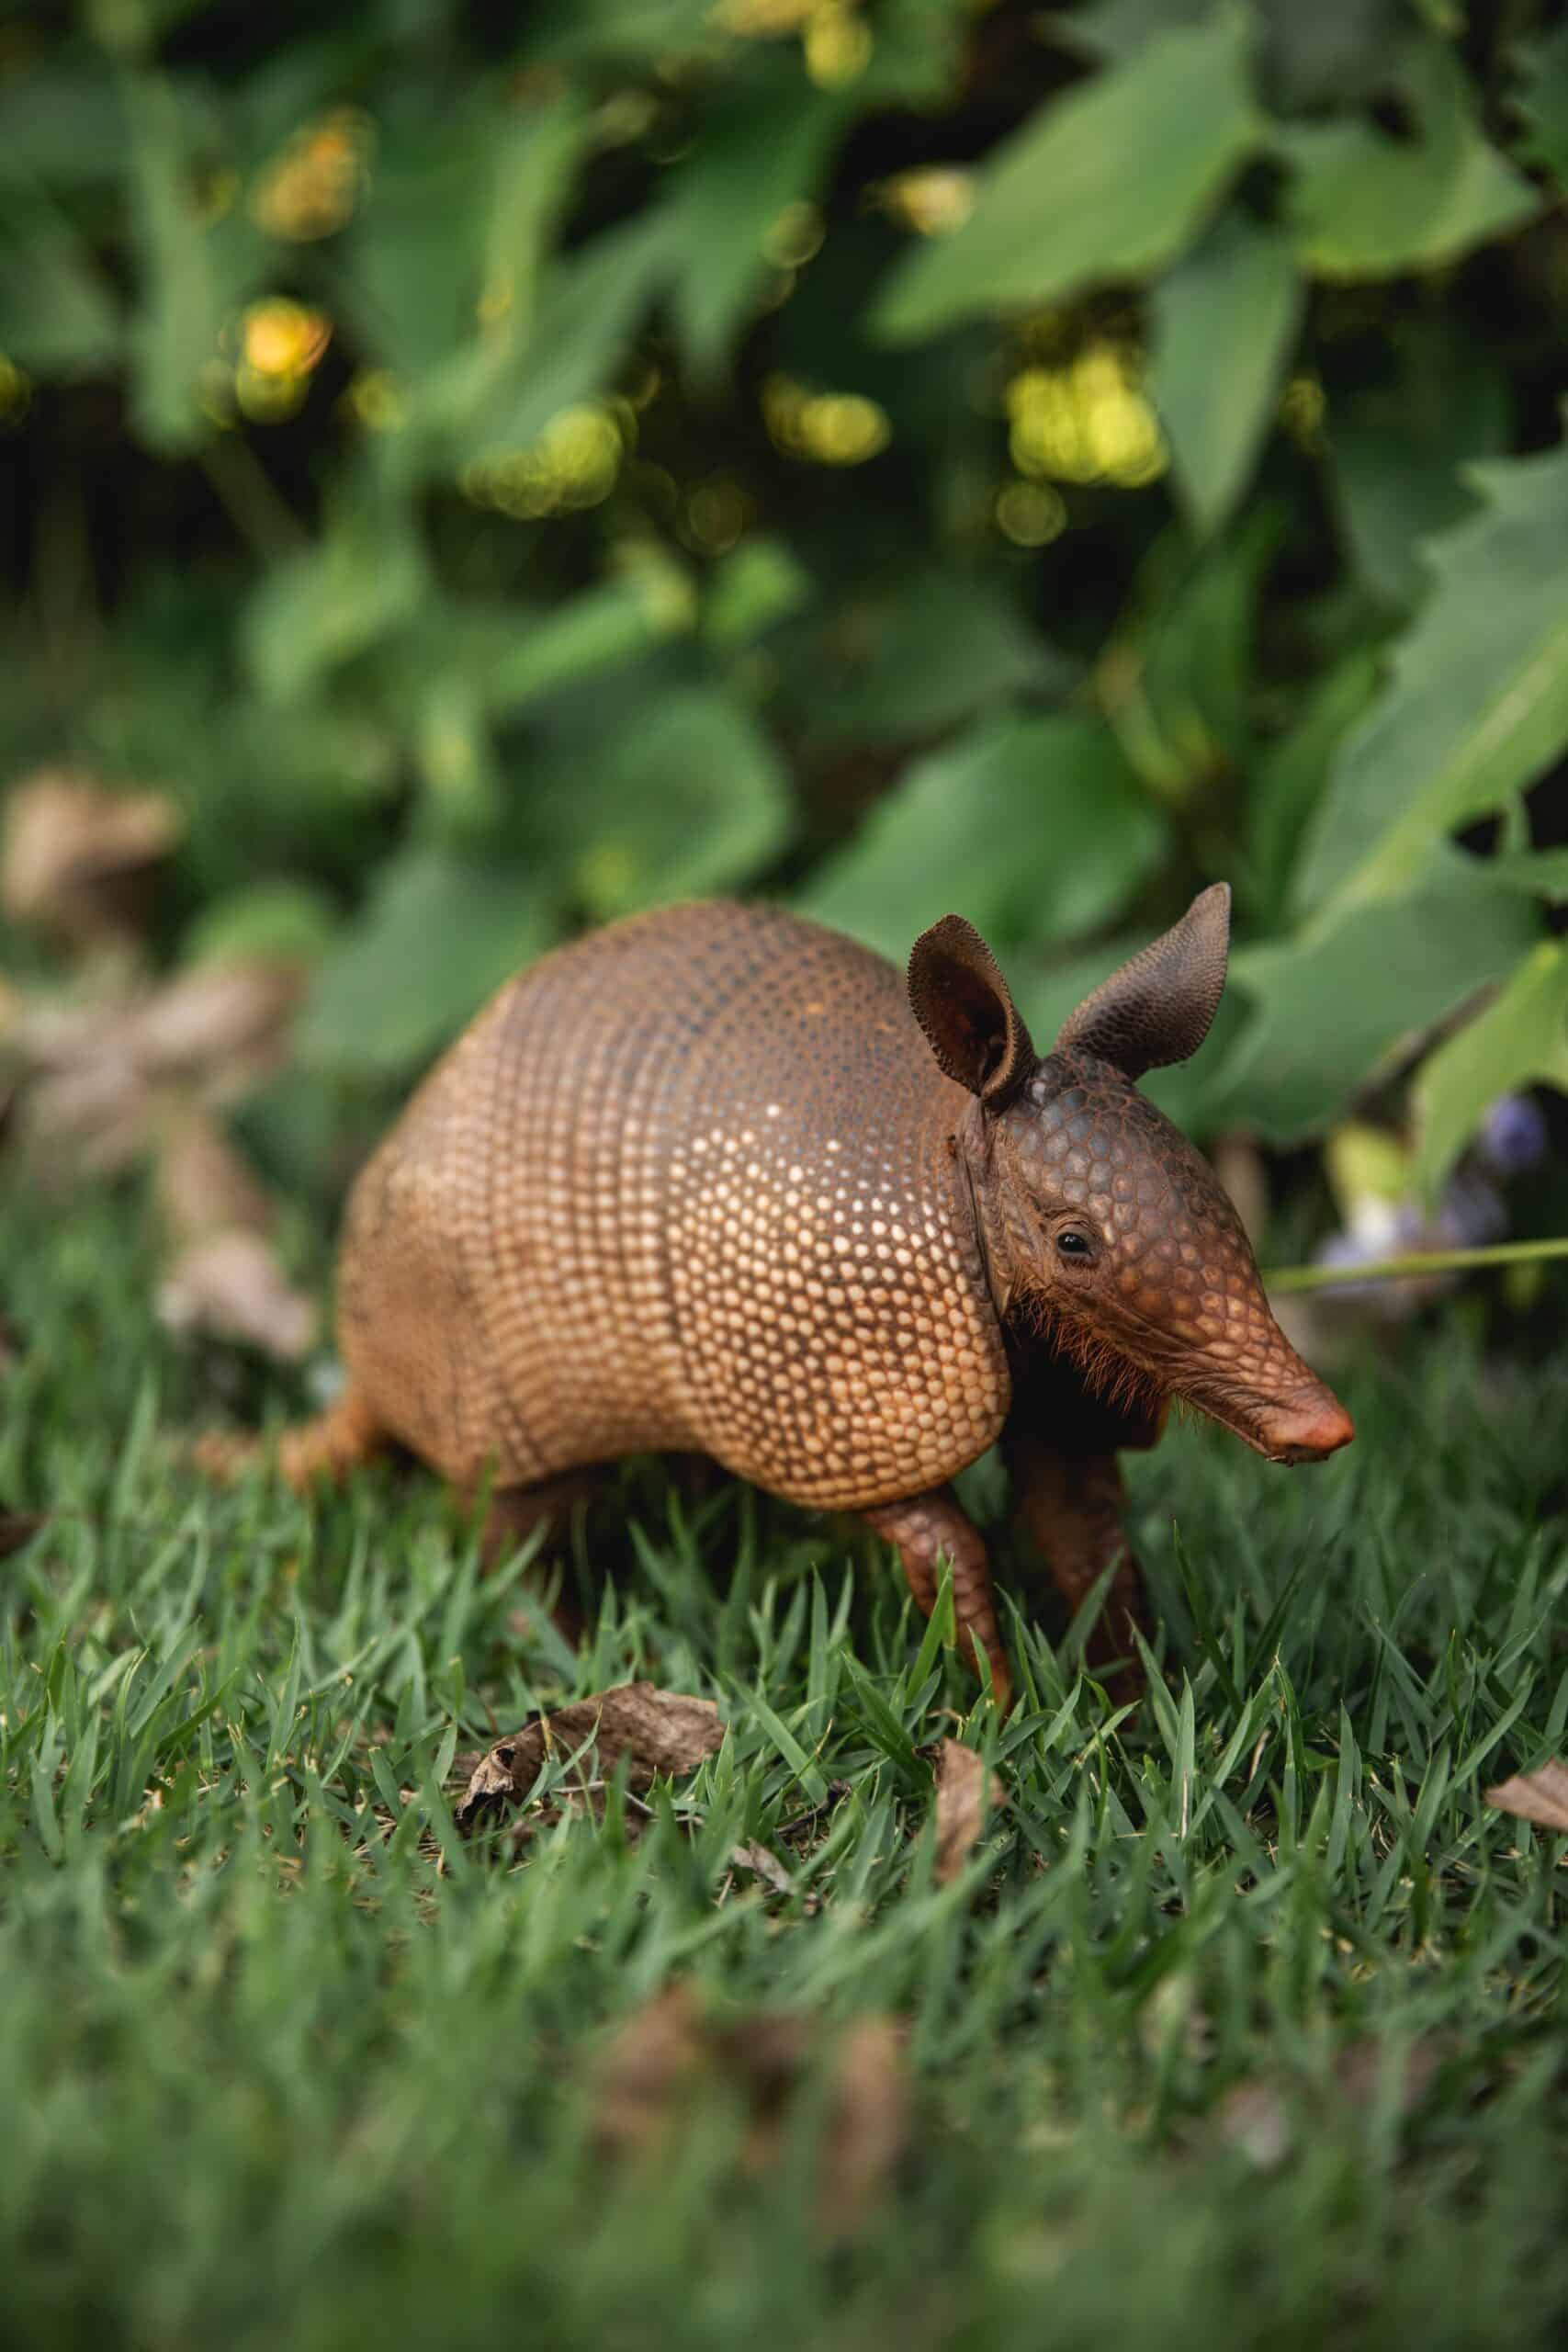 Armadillo Deterrence and Removal Made Simple